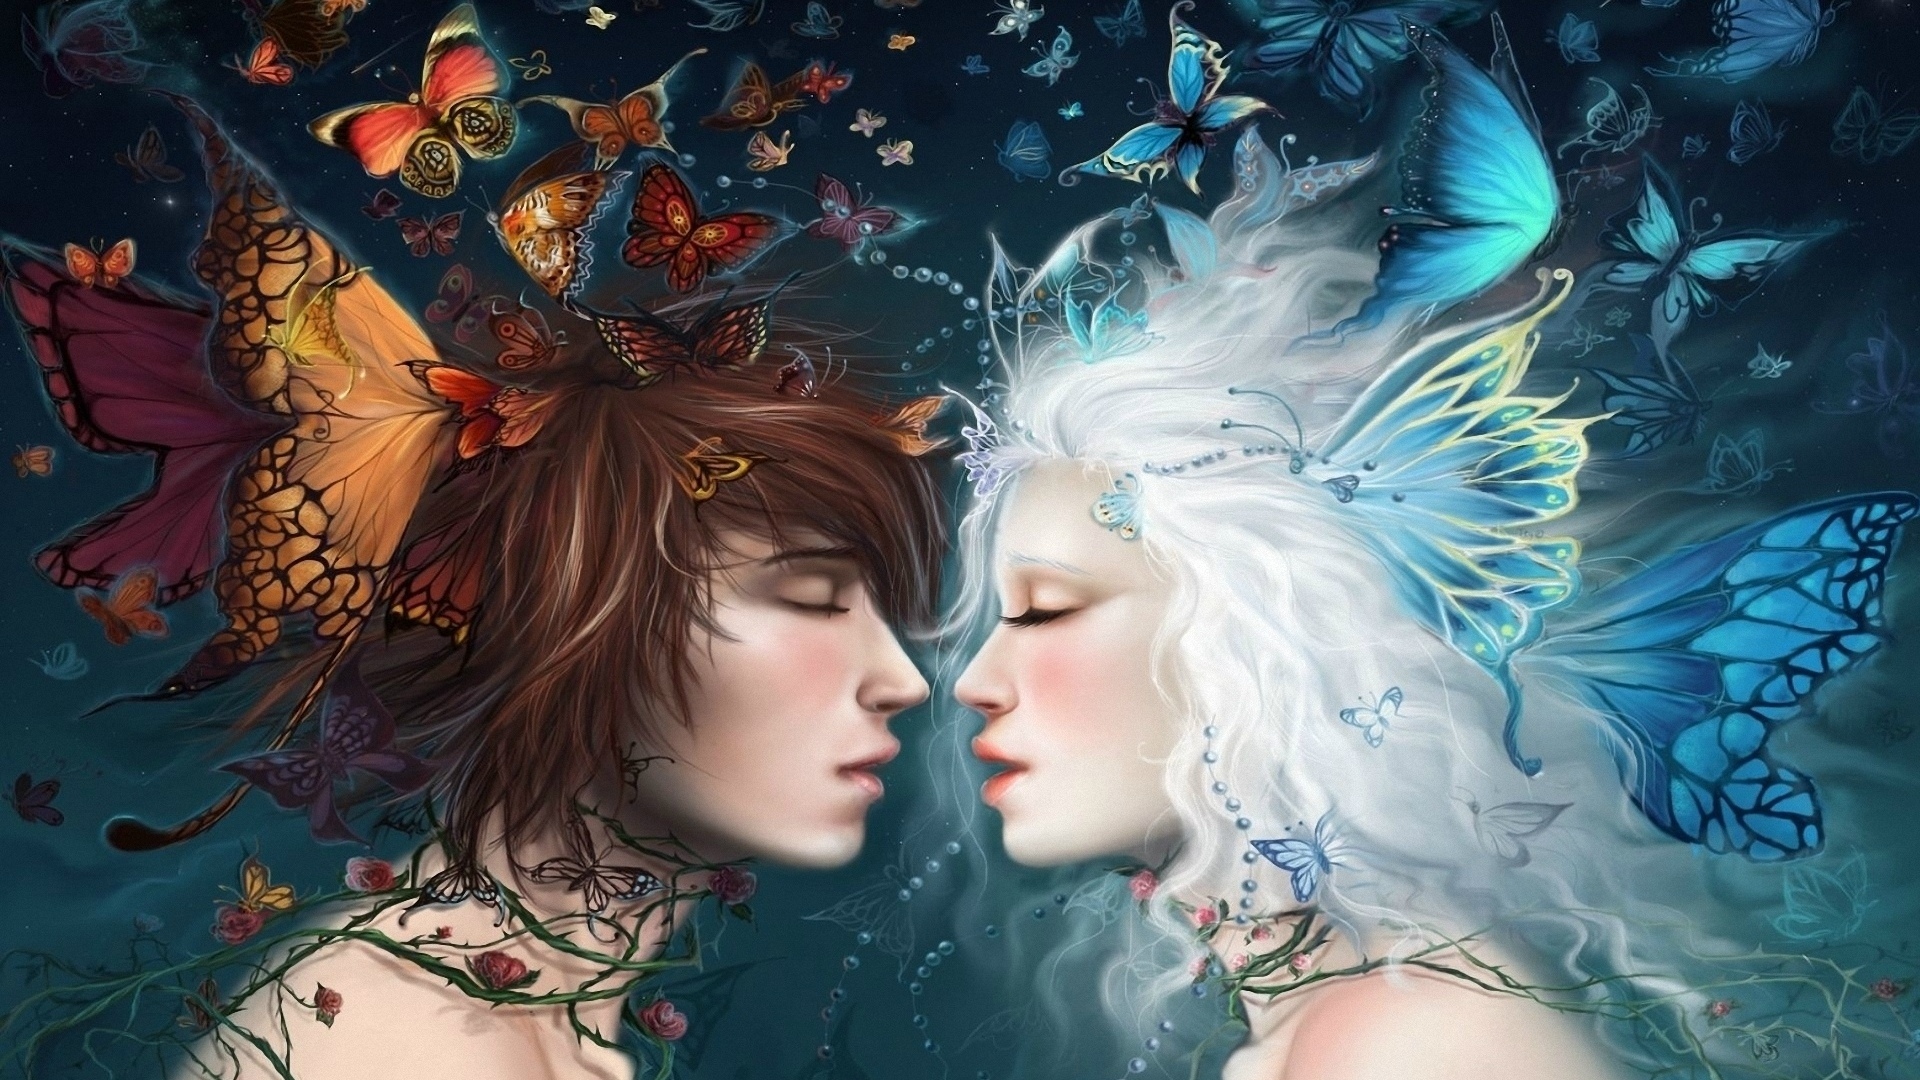 fantasy, Fairy, Gods, Love, Romance, Mood, Emotions, Kiss, Women, Females, Girls, Men, Males, Elf, Elves, Artistic, Paintings, Butterflies, Insects, Wings, Colors Wallpaper